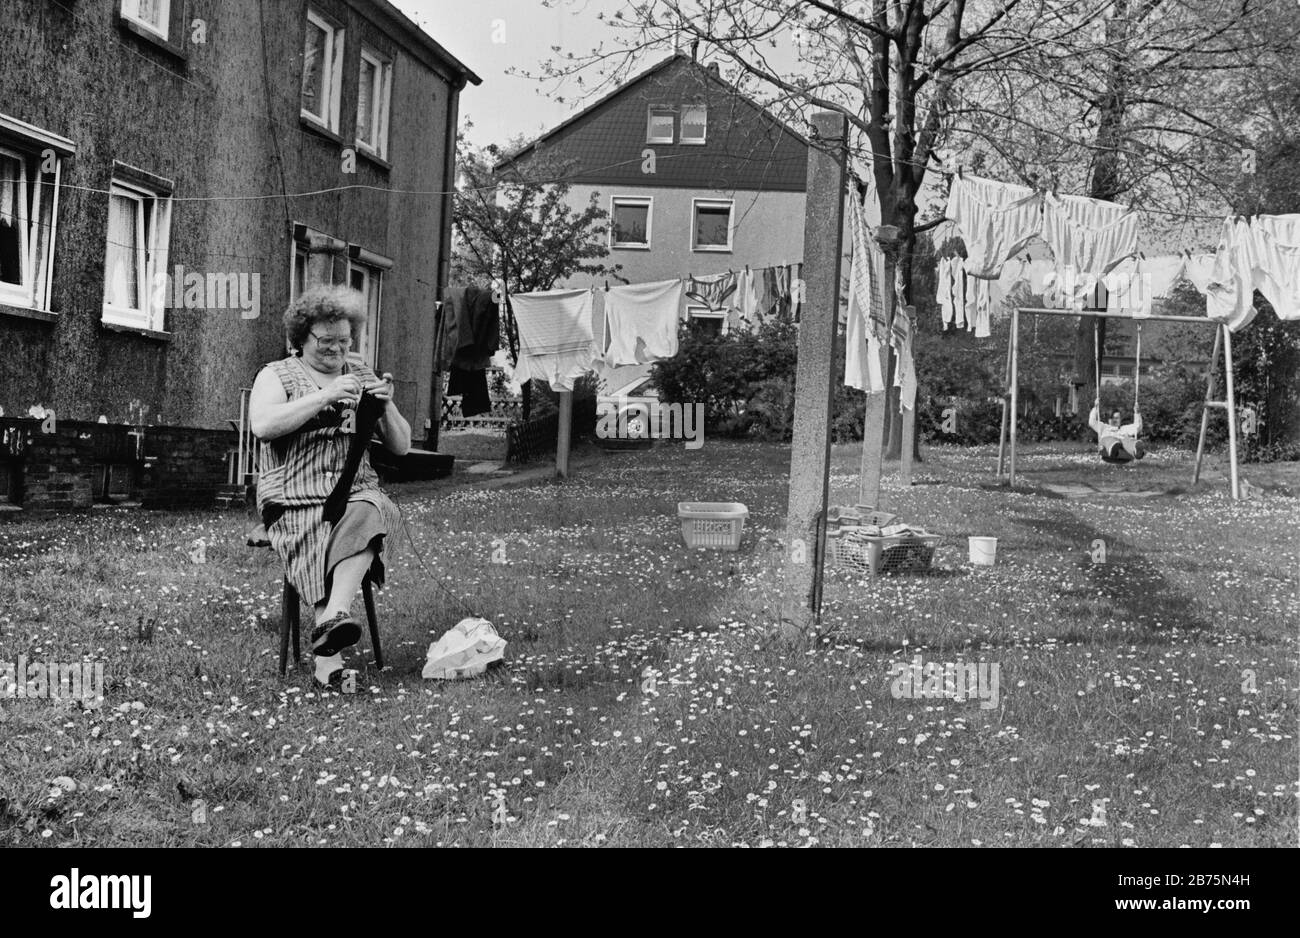 A woman is stuffing stockings in a backyard of a housing estate in Dortmund, laundry is hanging on washing lines and a child is swinging. June 19th, 1984. [automated translation] Stock Photo